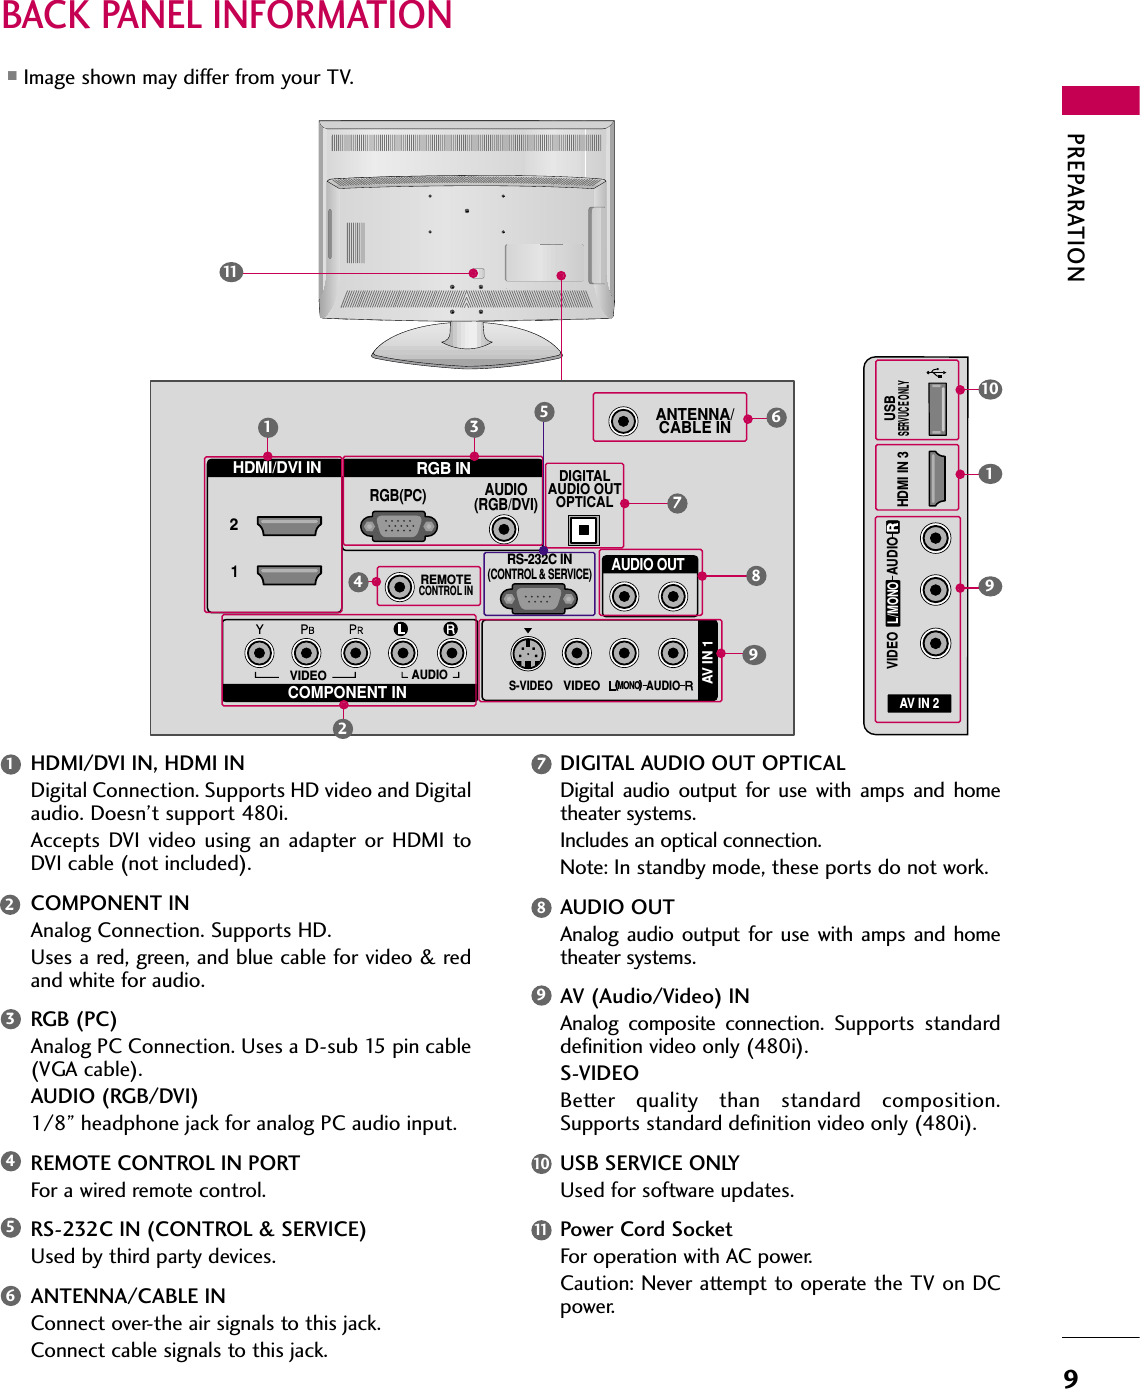 PREPARATION9BACK PANEL INFORMATION■Image shown may differ from your TV.COMPONENT INAUDIO(RGB/DVI)RGB(PC)REMOTECONTROL INANTENNA/CABLE INRS-232C IN(CONTROL &amp; SERVICE)VIDEOAUDIODIGITALAUDIO OUTOPTICALAUDIO OUTAV IN 1VIDEOMONO( )AUDIOS-VIDEO21RGB INHDMI/DVI IN314678295AV IN 2L/MONORAUDIOVIDEOUSBSERVUCE ONLYHDMI IN 3910111HDMI/DVI IN, HDMI INDigital Connection. Supports HD video and Digitalaudio. Doesn’t support 480i. Accepts DVI video using an adapter or HDMI toDVI cable (not included).COMPONENT INAnalog Connection. Supports HD. Uses a red, green, and blue cable for video &amp; redand white for audio.RGB (PC)Analog PC Connection. Uses a D-sub 15 pin cable(VGA cable).AUDIO (RGB/DVI)1/8” headphone jack for analog PC audio input.REMOTE CONTROL IN PORTFor a wired remote control.RS-232C IN (CONTROL &amp; SERVICE)Used by third party devices.ANTENNA/CABLE INConnect over-the air signals to this jack.Connect cable signals to this jack.DIGITAL AUDIO OUT OPTICALDigital audio output for use with amps and hometheater systems. Includes an optical connection.Note: In standby mode, these ports do not work.AUDIO OUTAnalog audio output for use with amps and hometheater systems.AV (Audio/Video) INAnalog composite connection. Supports standarddefinition video only (480i).S-VIDEOBetter quality than standard composition.Supports standard definition video only (480i).USB SERVICE ONLYUsed for software updates.Power Cord SocketFor operation with AC power. Caution: Never attempt to operate the TV on DCpower.1234569101178